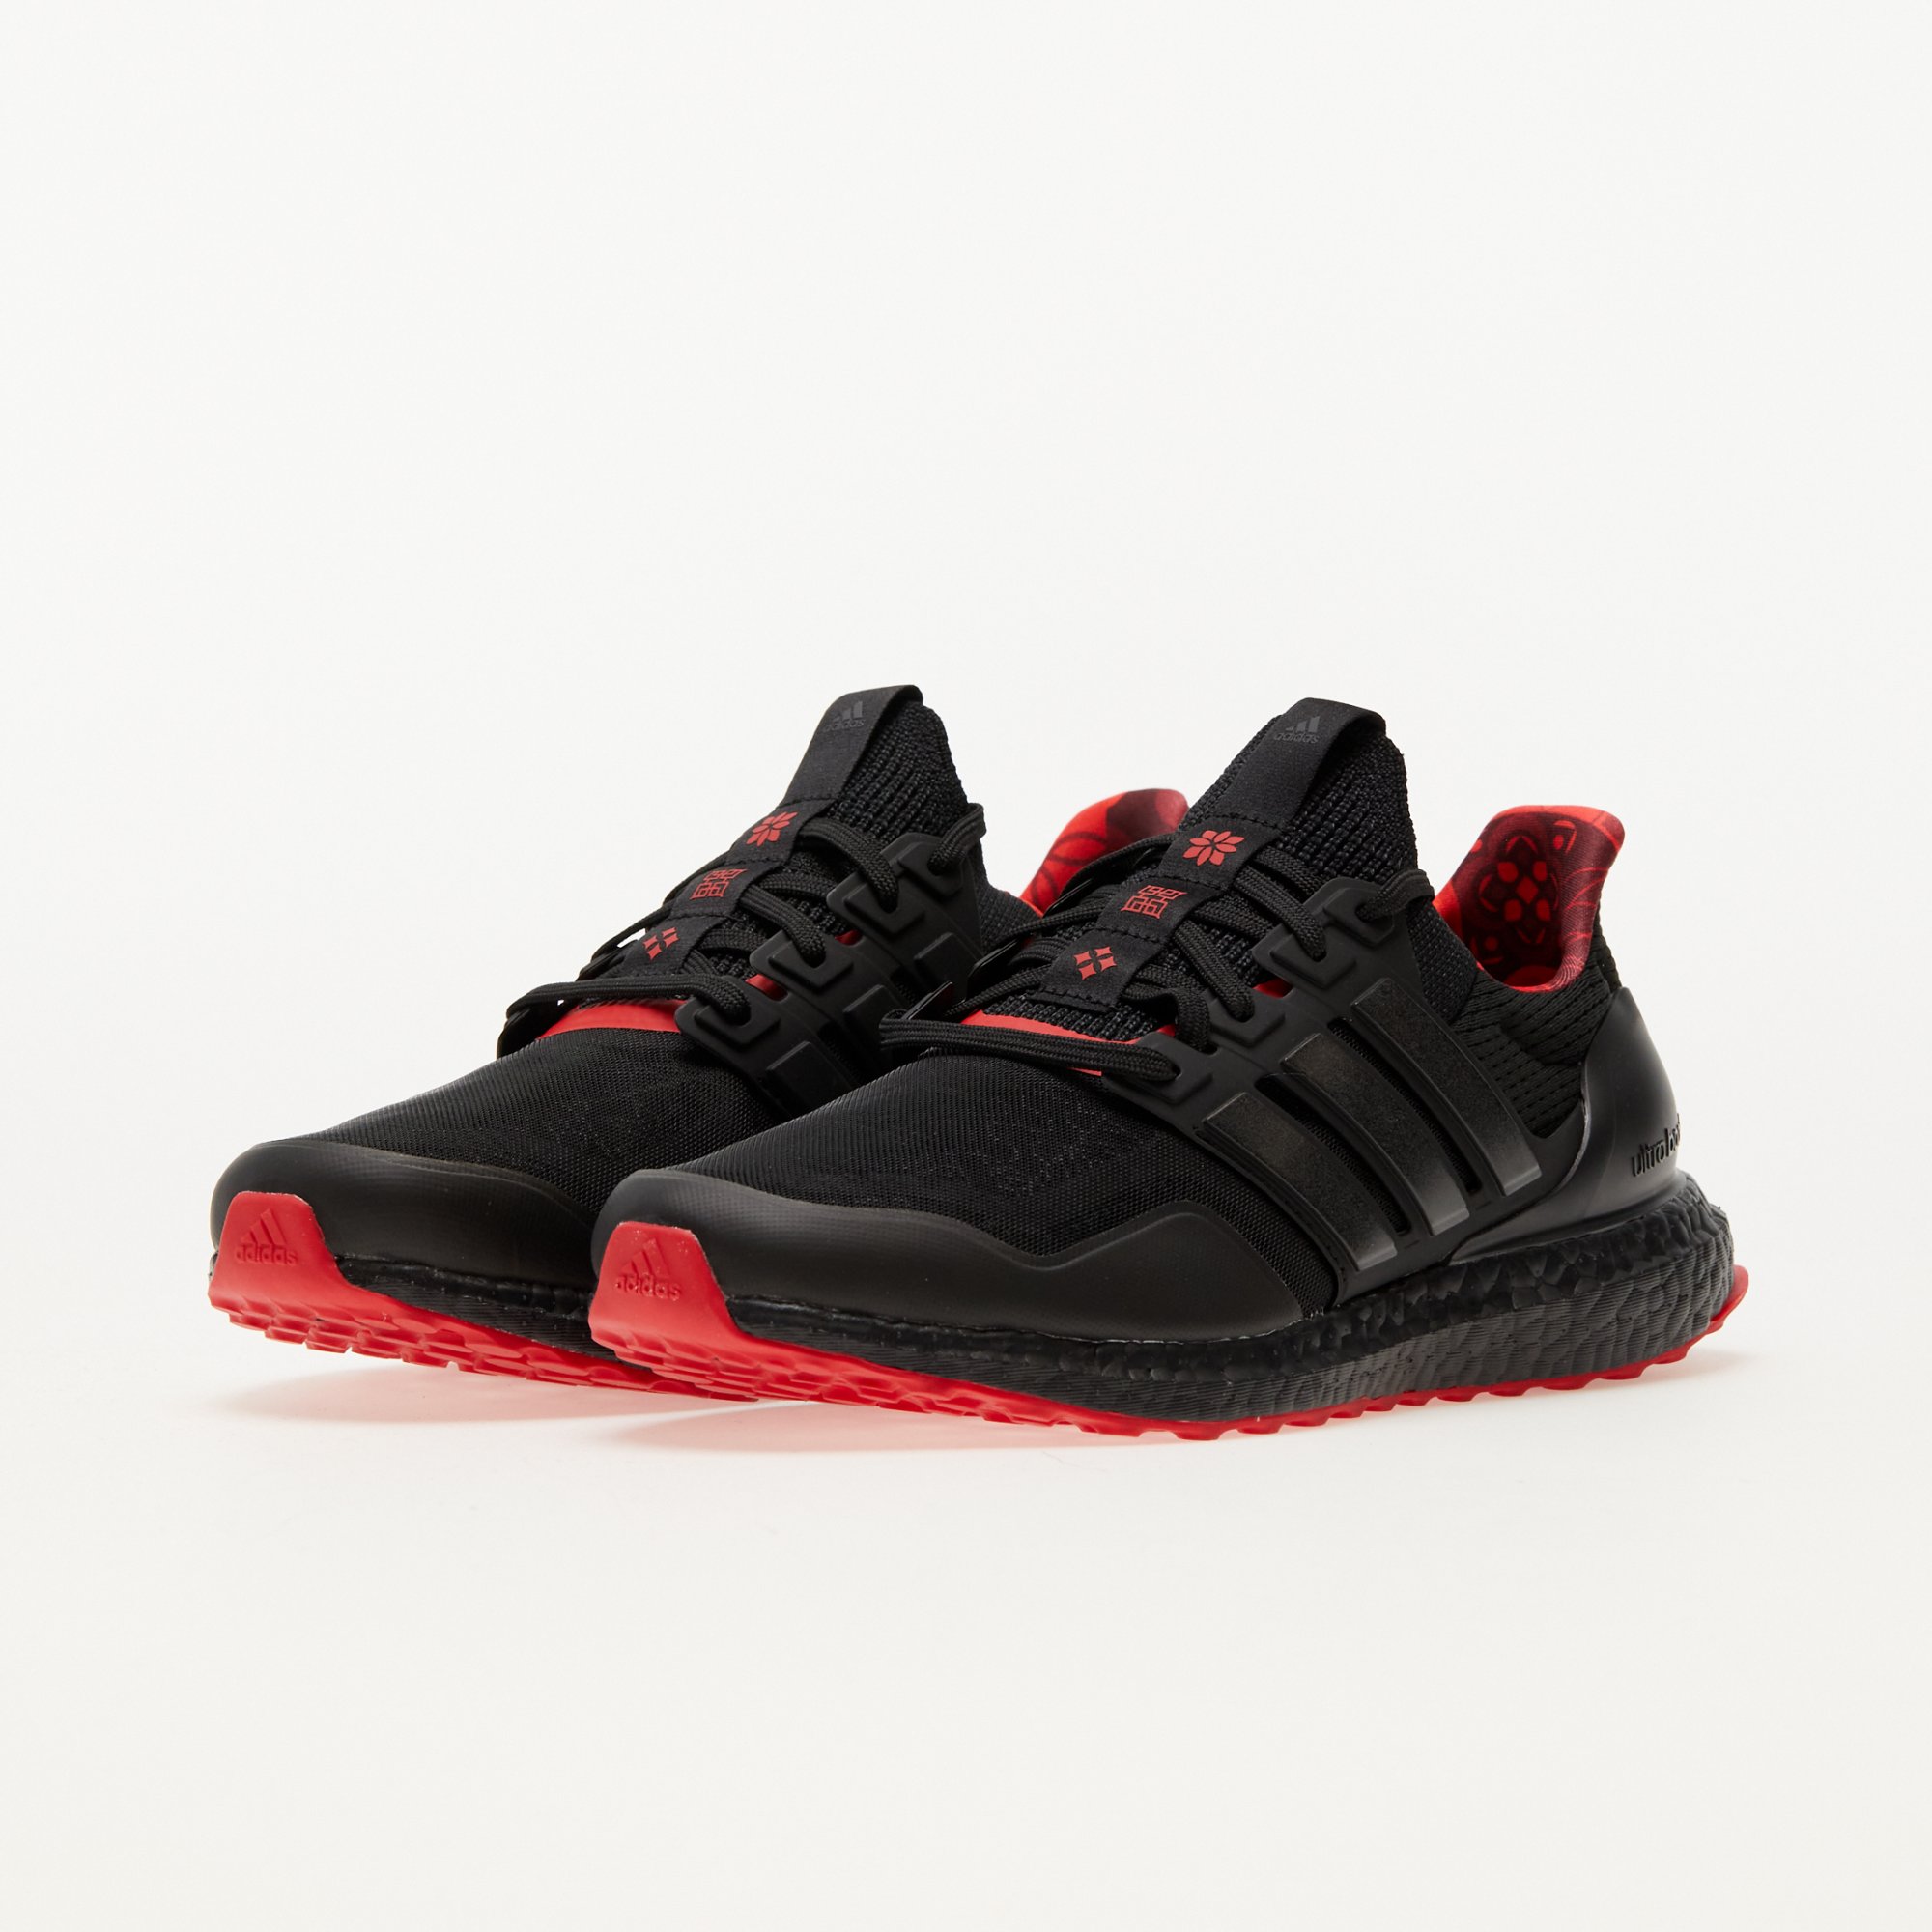 adidas Performance Ultraboost DNA Mono Chinese New Year clear black / clear black / scarlet adidas Performance